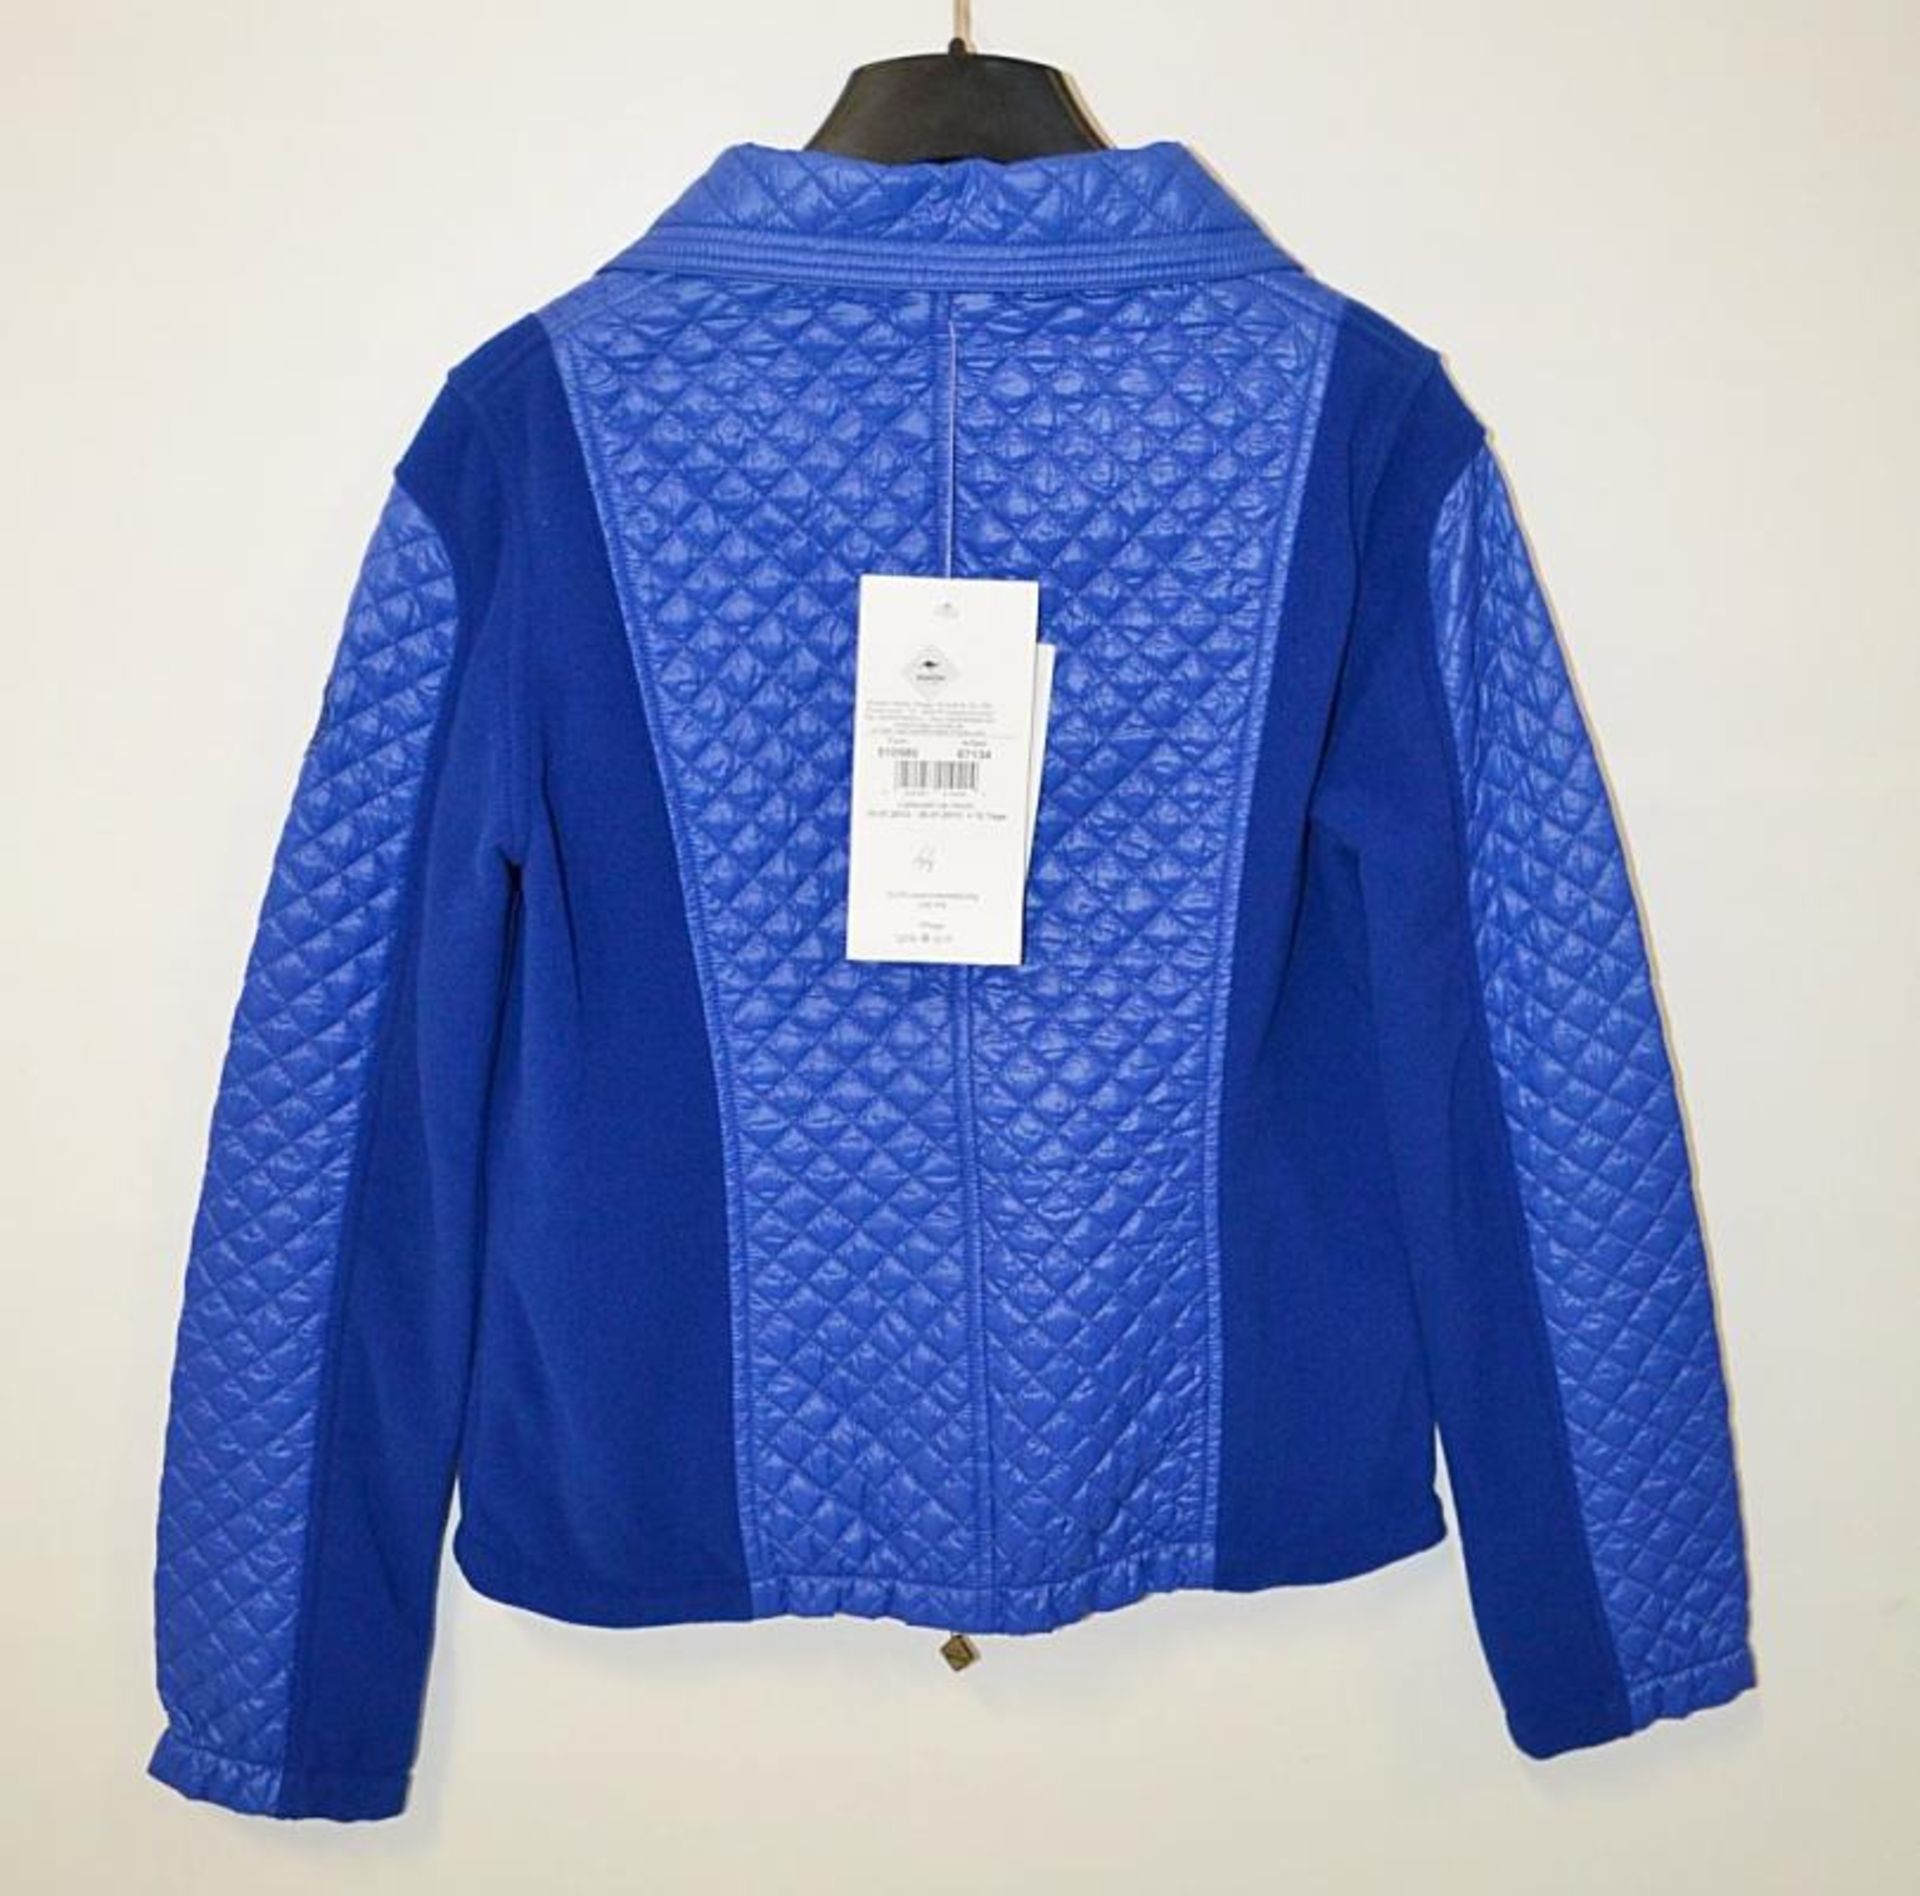 1 x Premium Branded Womens Easy Care Fleece Jacket - Wind & Water Resistant - Colour: Bright Blue - - Image 6 of 7